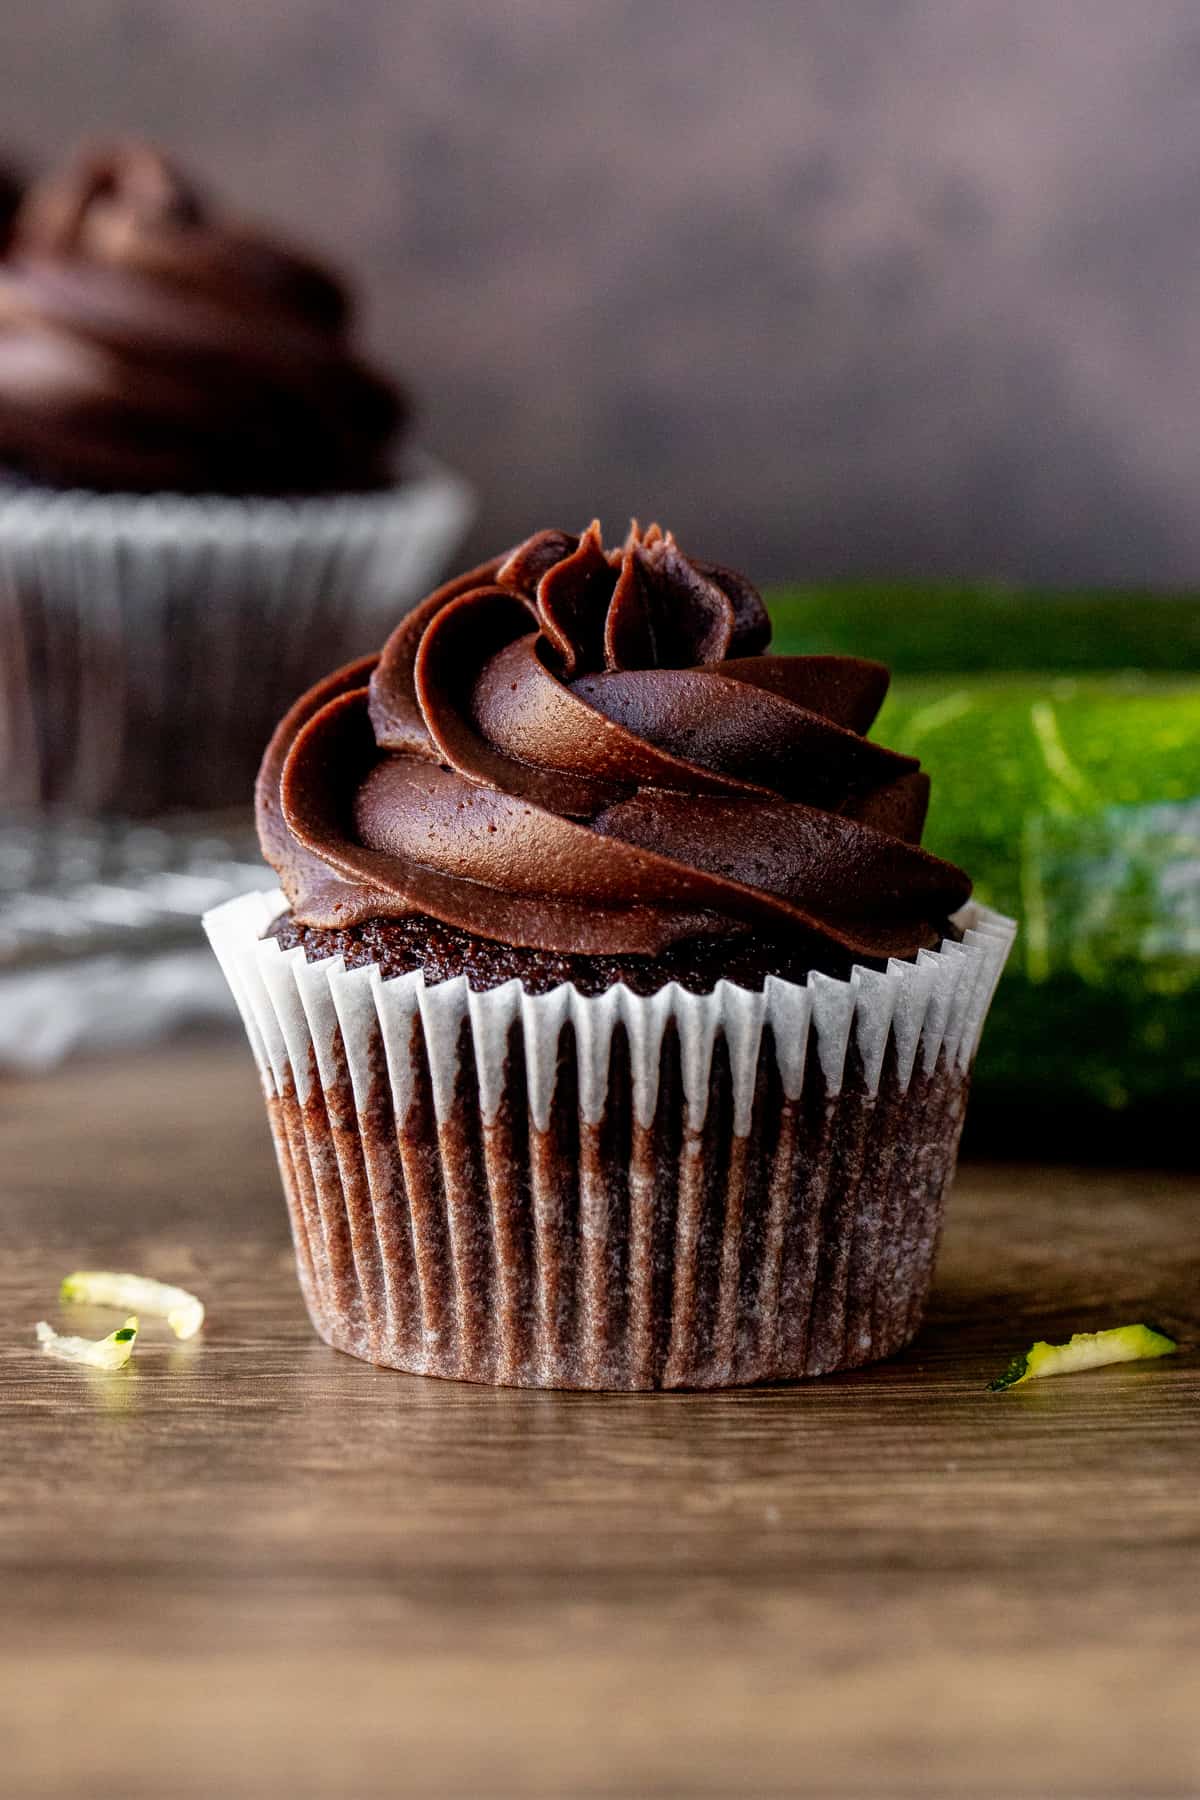 Chocolate zucchini cupcake with zucchini and cupcakes in background